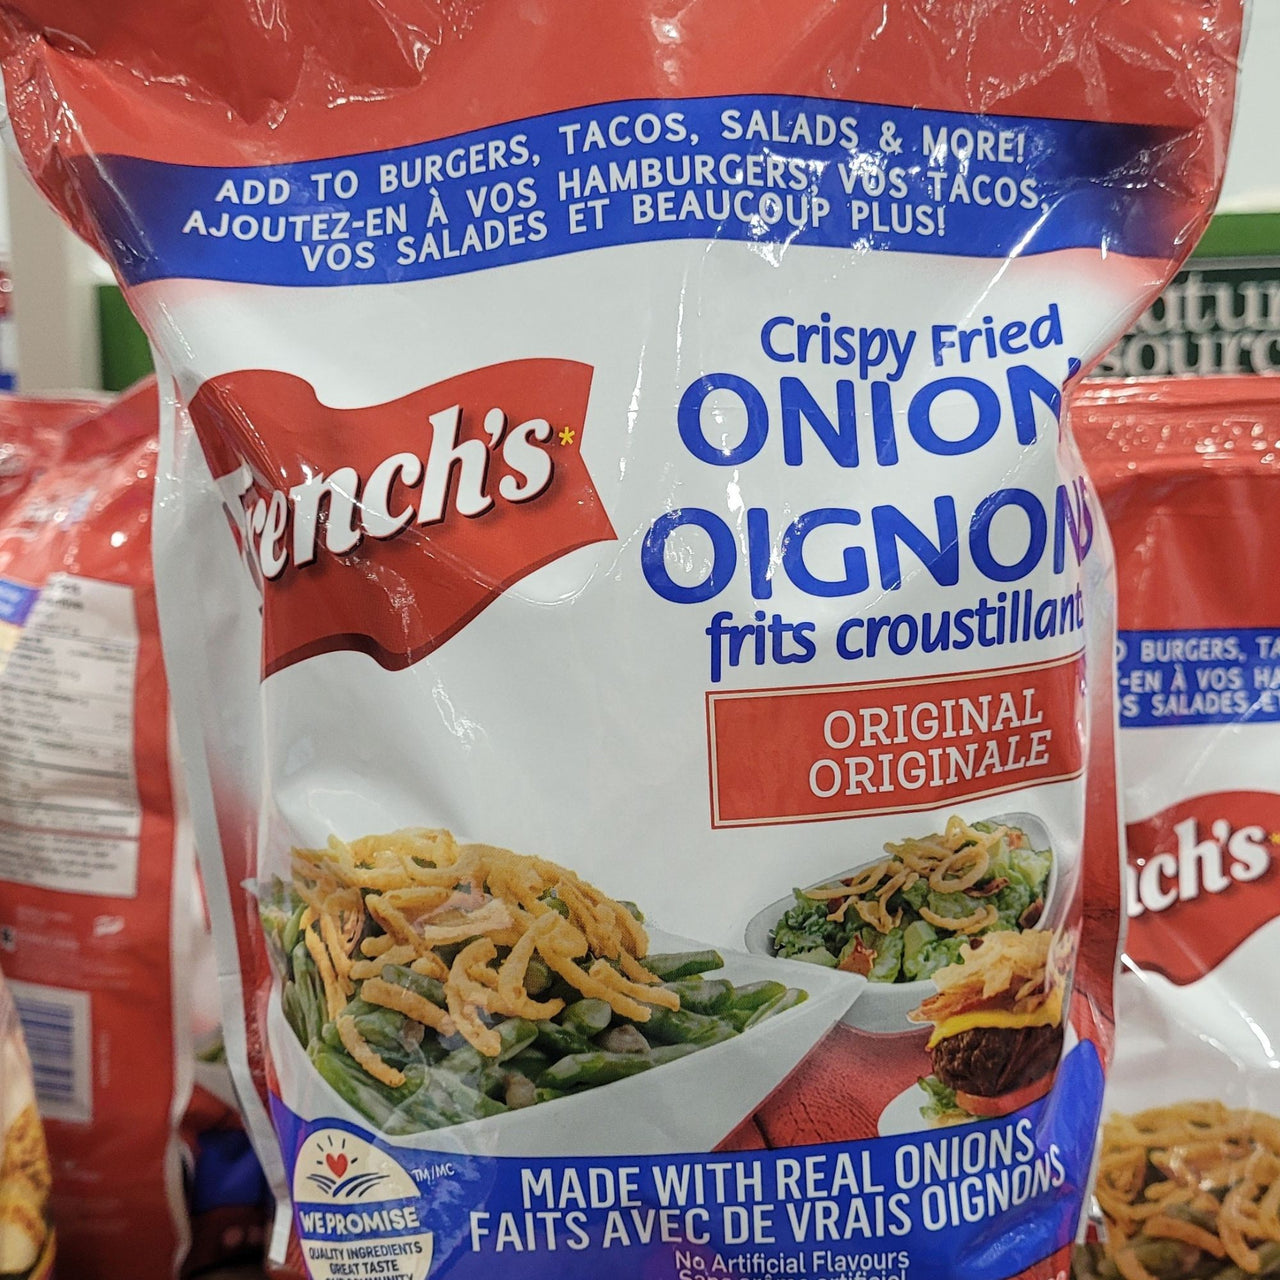 Image of French's Fried Onions